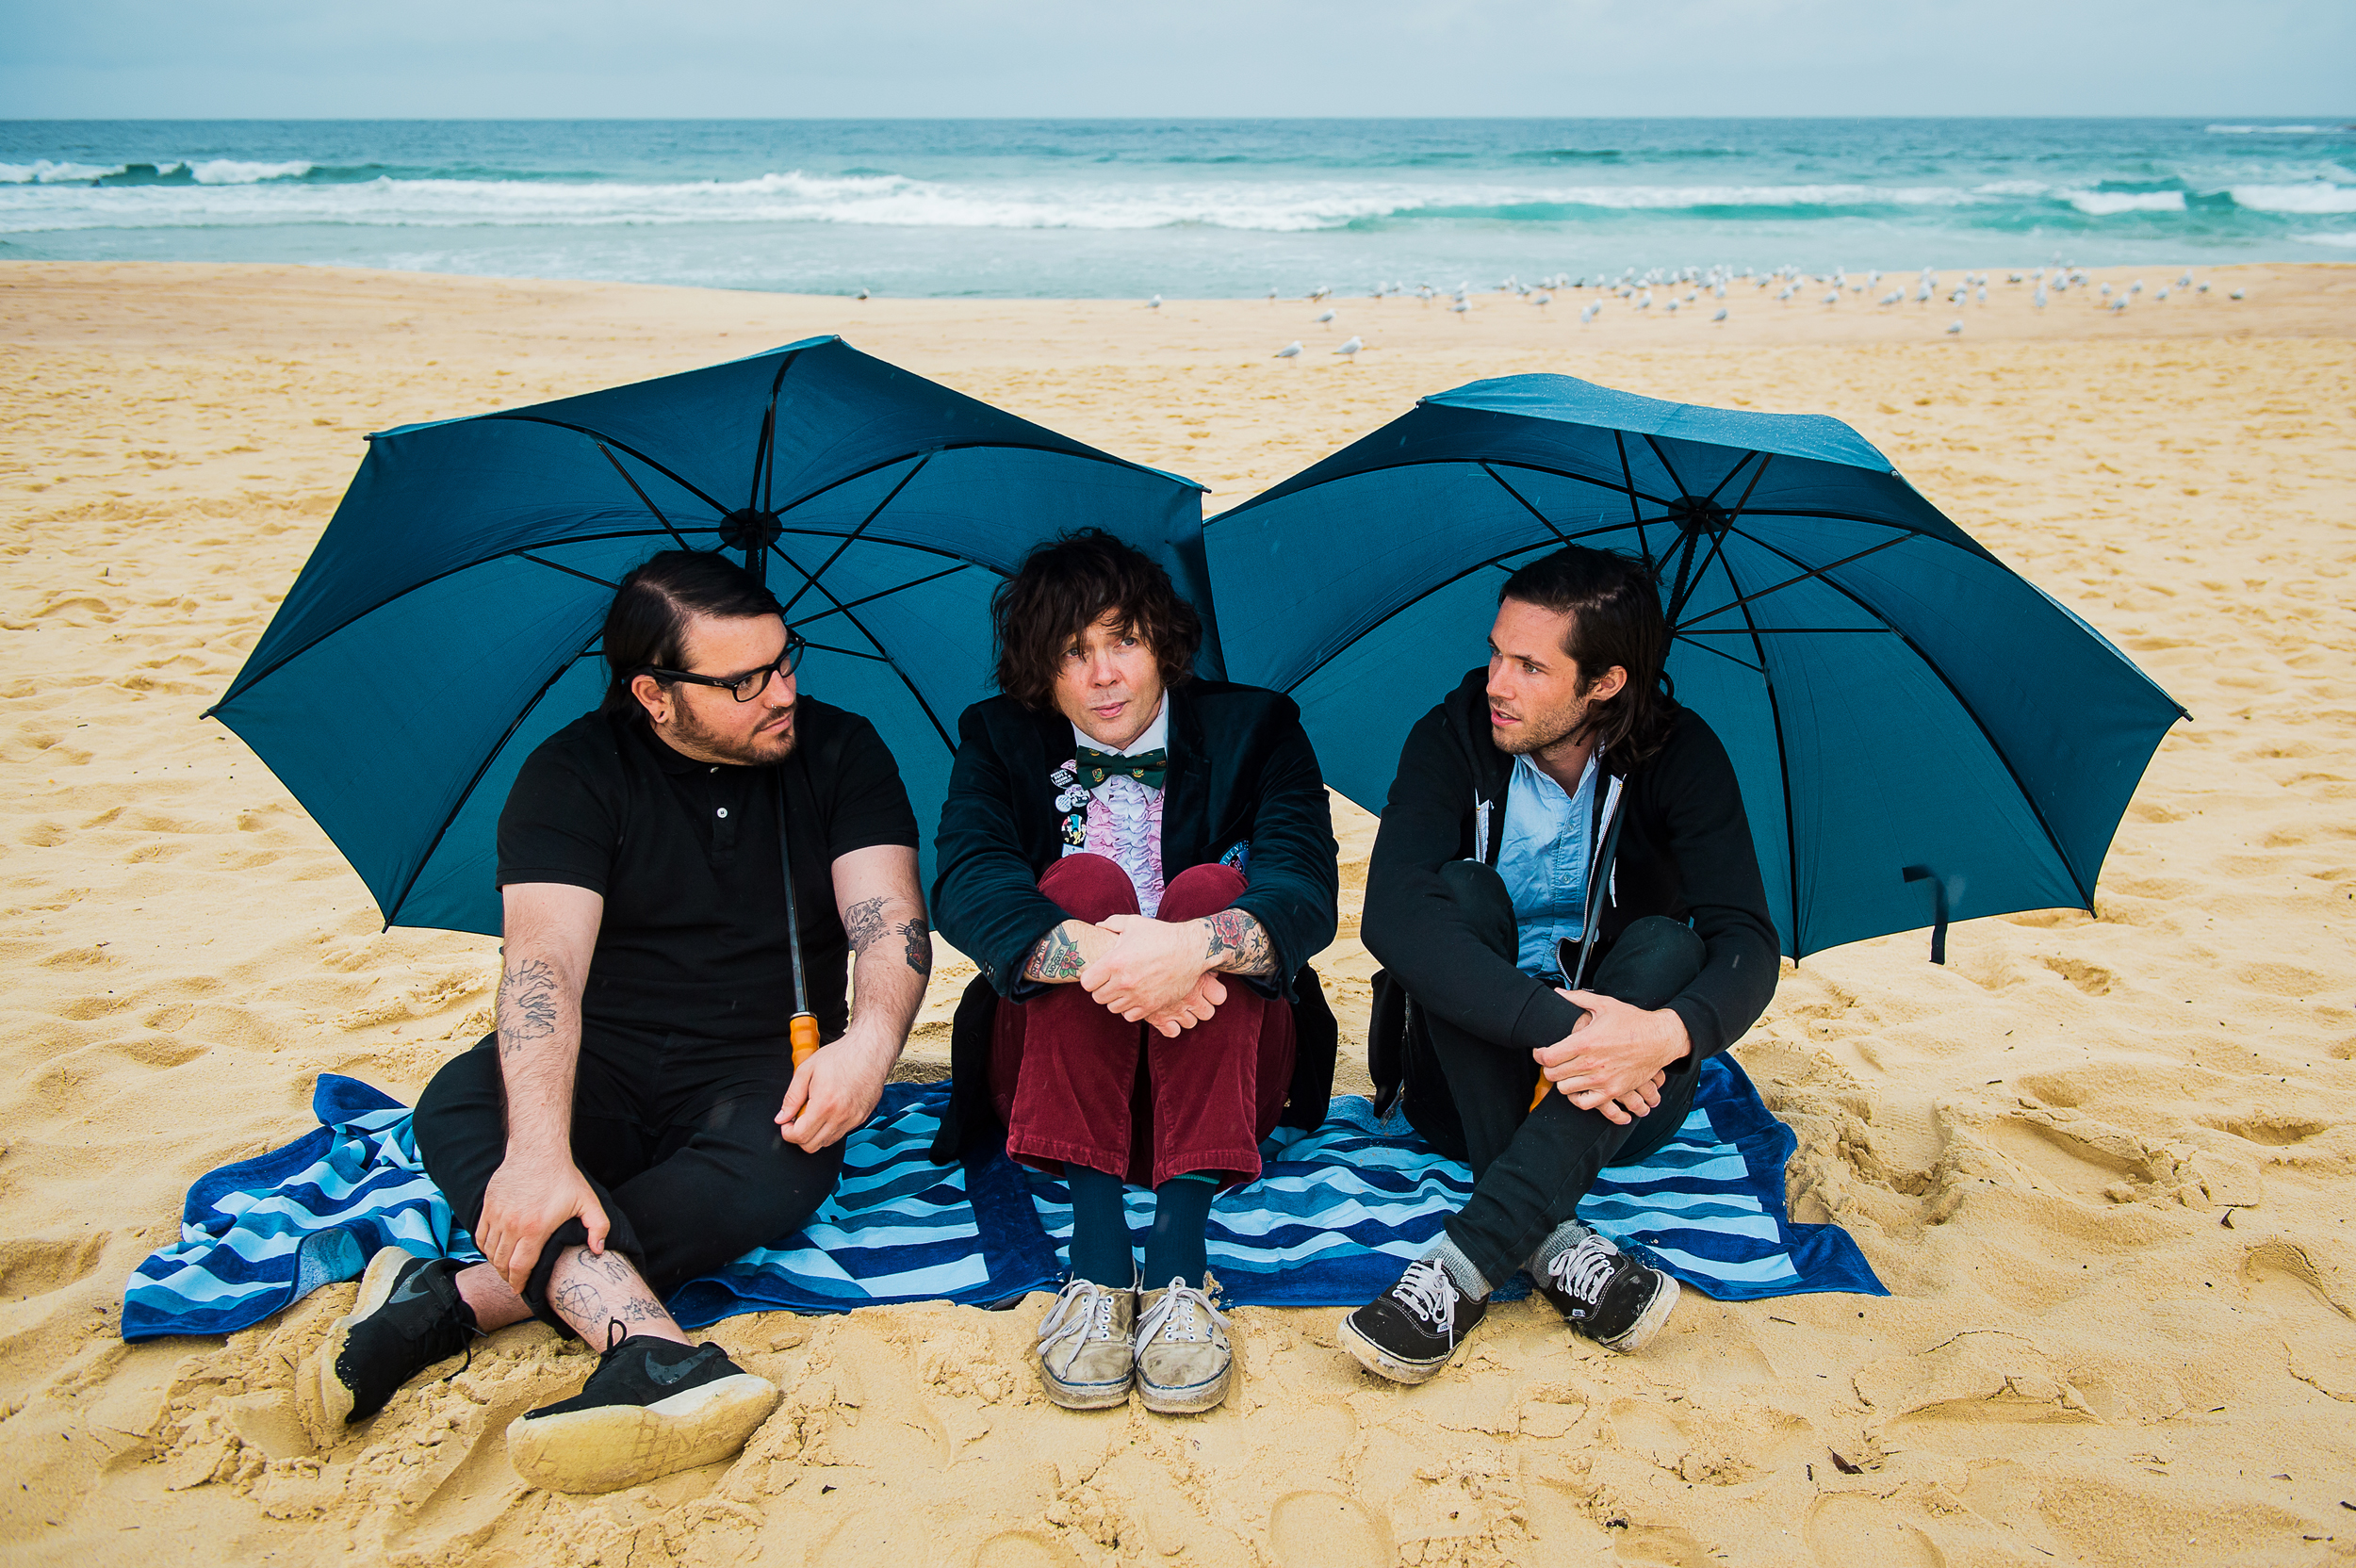 James Alex from Beach Slang shares his favourite LPs with Northern Transmissions. Some of his picks include titles by Jawbreaker and The Magnetic Fields.